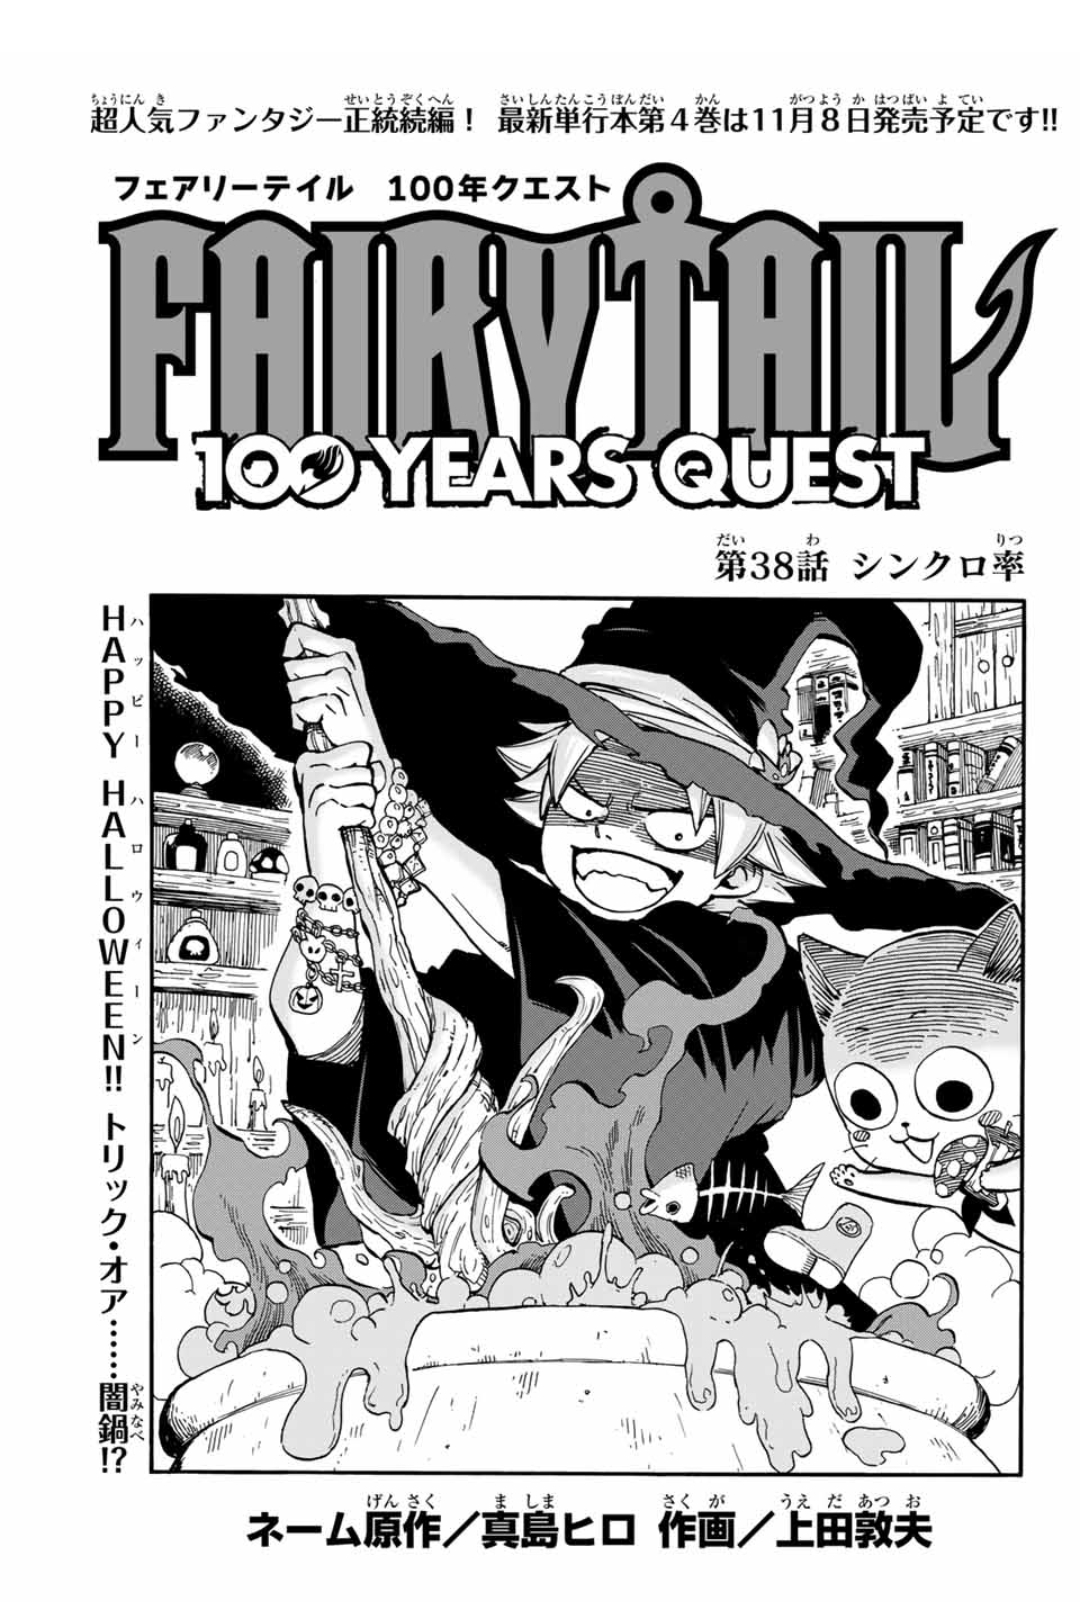 Fairy Tail 100 Years Quest Chapter 38 Fairy Tail Wiki Fandom